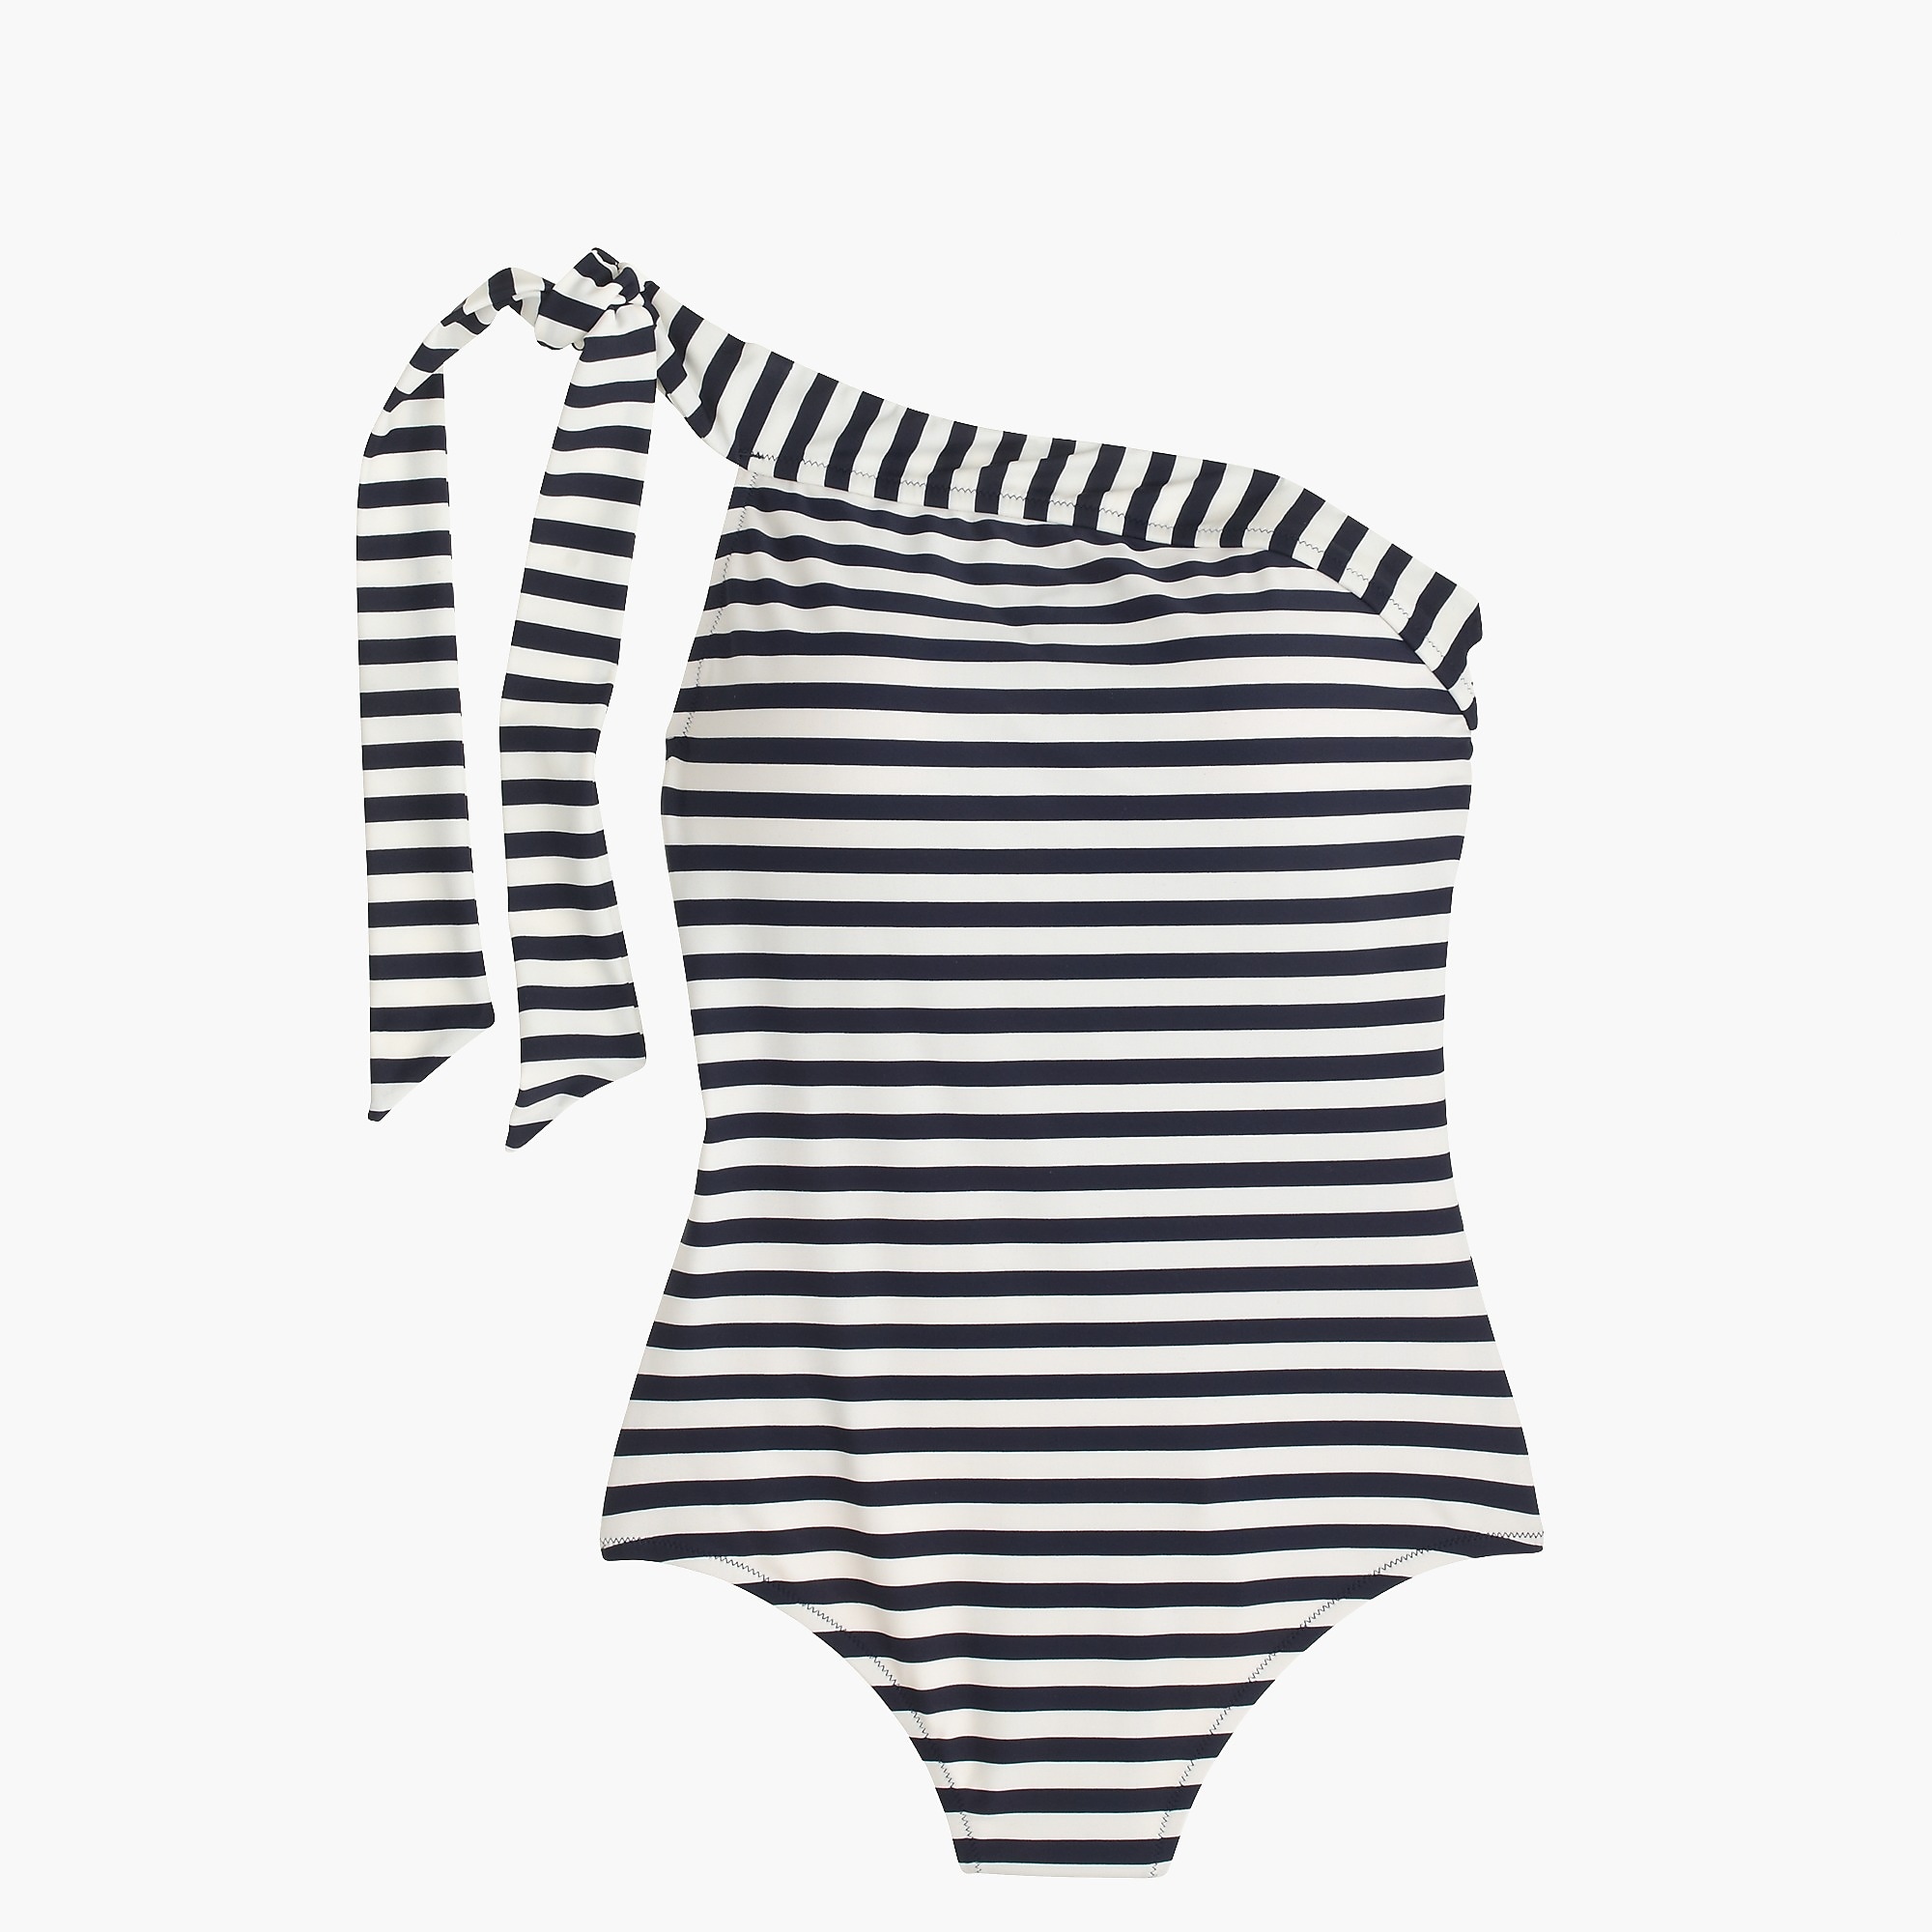 One-shoulder one-piece swimsuit in classic stripe